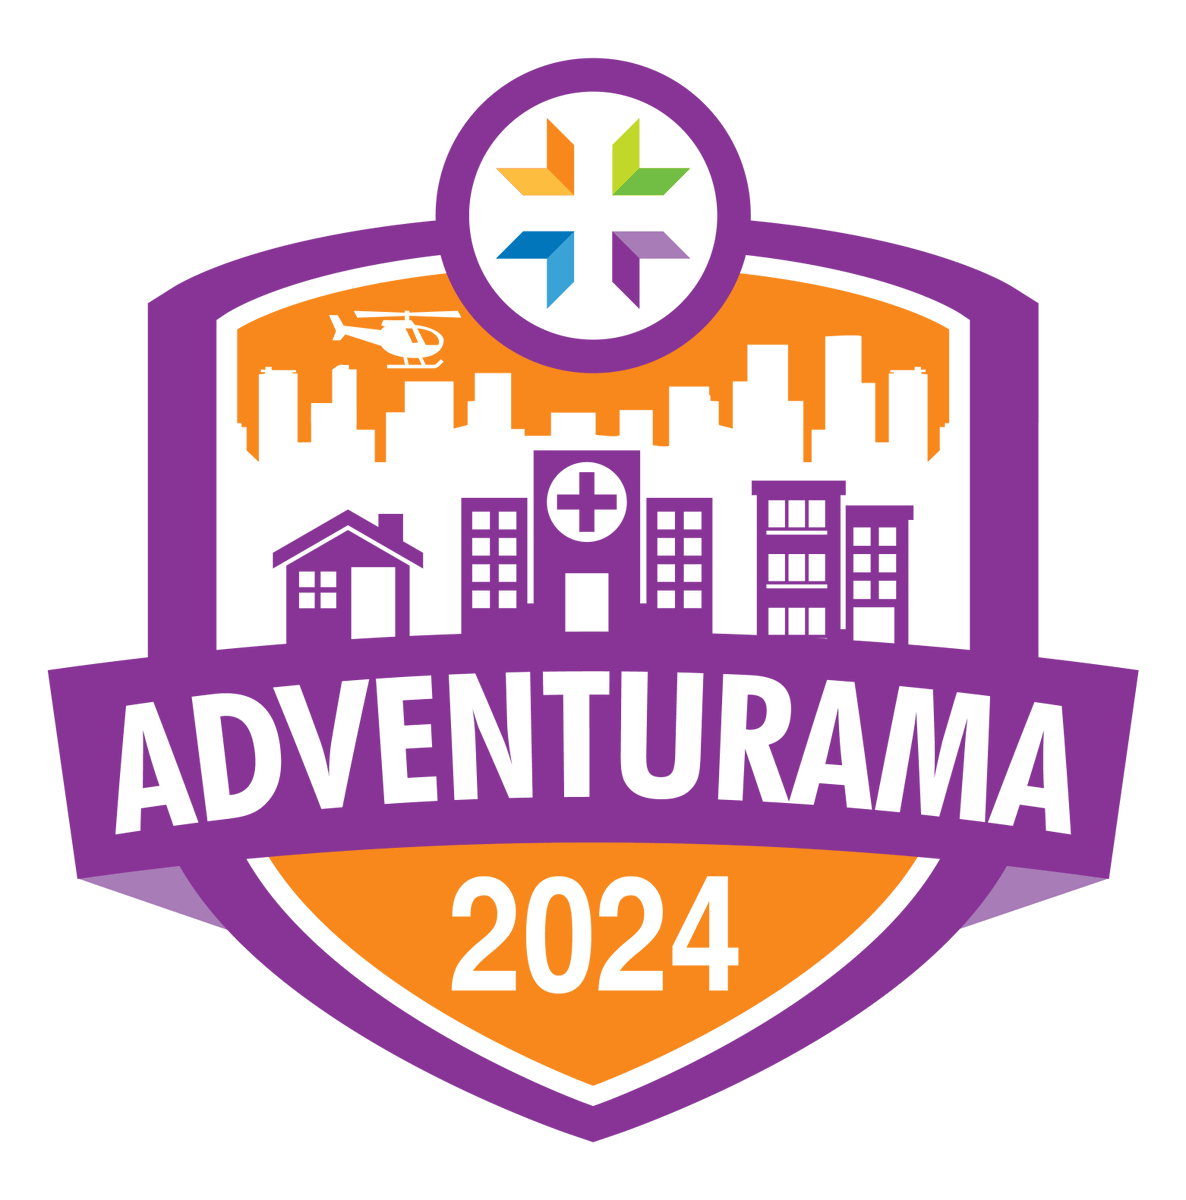 Thank you to the many event sponsors joining us on our adventure on June 8. Thank you Perkins&Will, MN Vikings, and Vervint for you recent support. Visit hennepinhealthcare.org/rama24 to form a team, volunteer or donate.